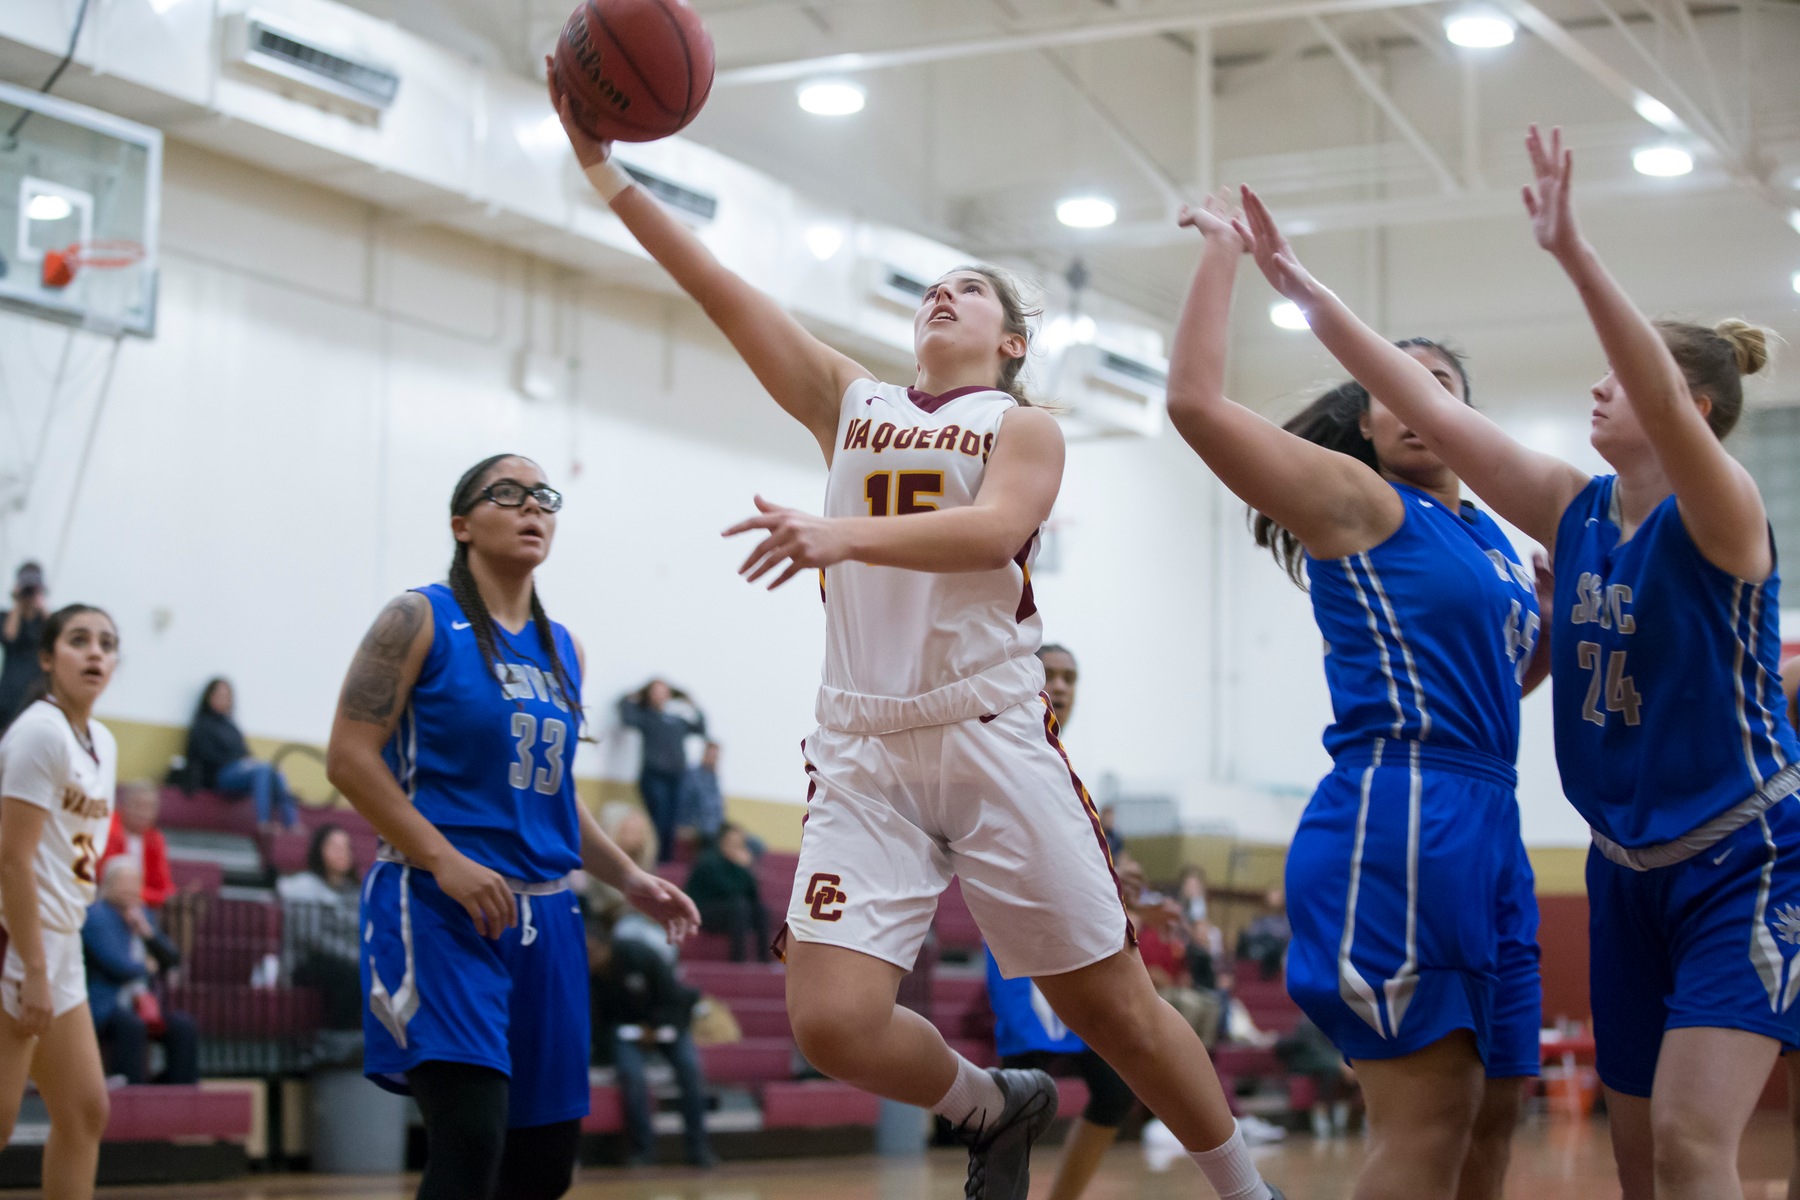 Women's Basketball Team wins sixth straight with 61-47 win over El Camino